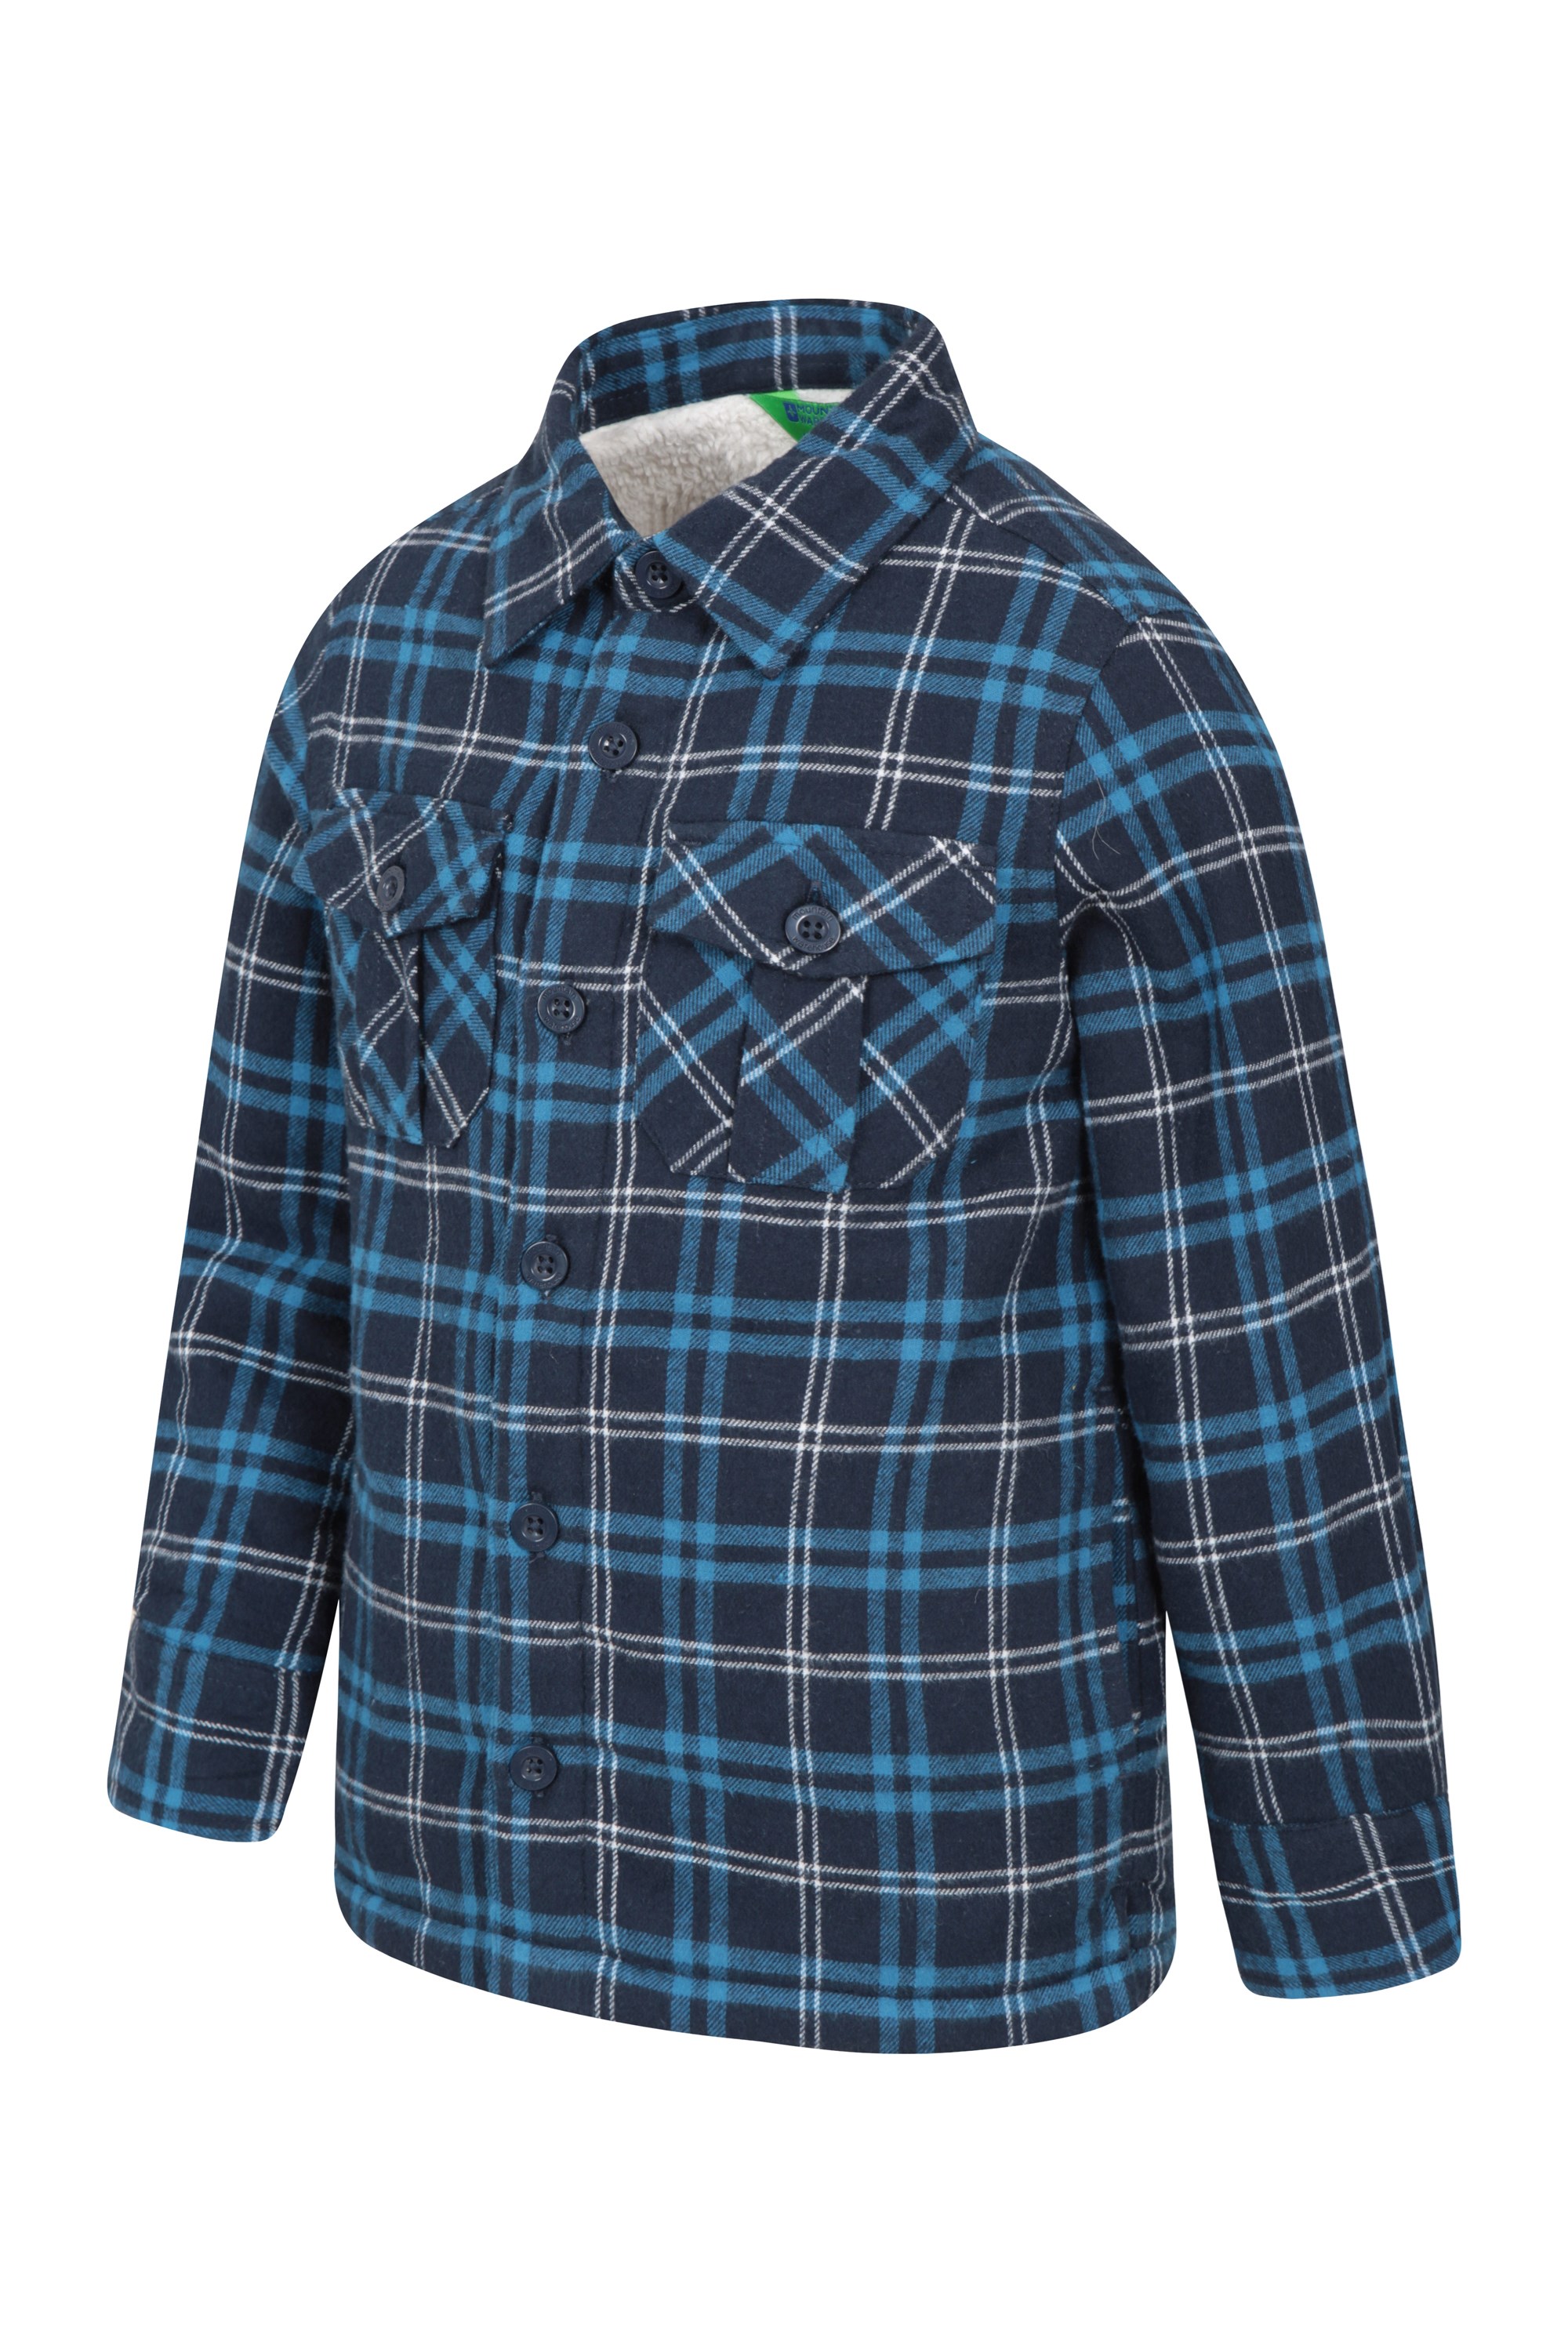 Mountain Warehouse Jackson Youth Shacket for Boy Mix between Flannel Shirt and Jacket with Button Pockets & Trendy Plaid Pattern 100% Cotton Outer & Soft Furry Inside 